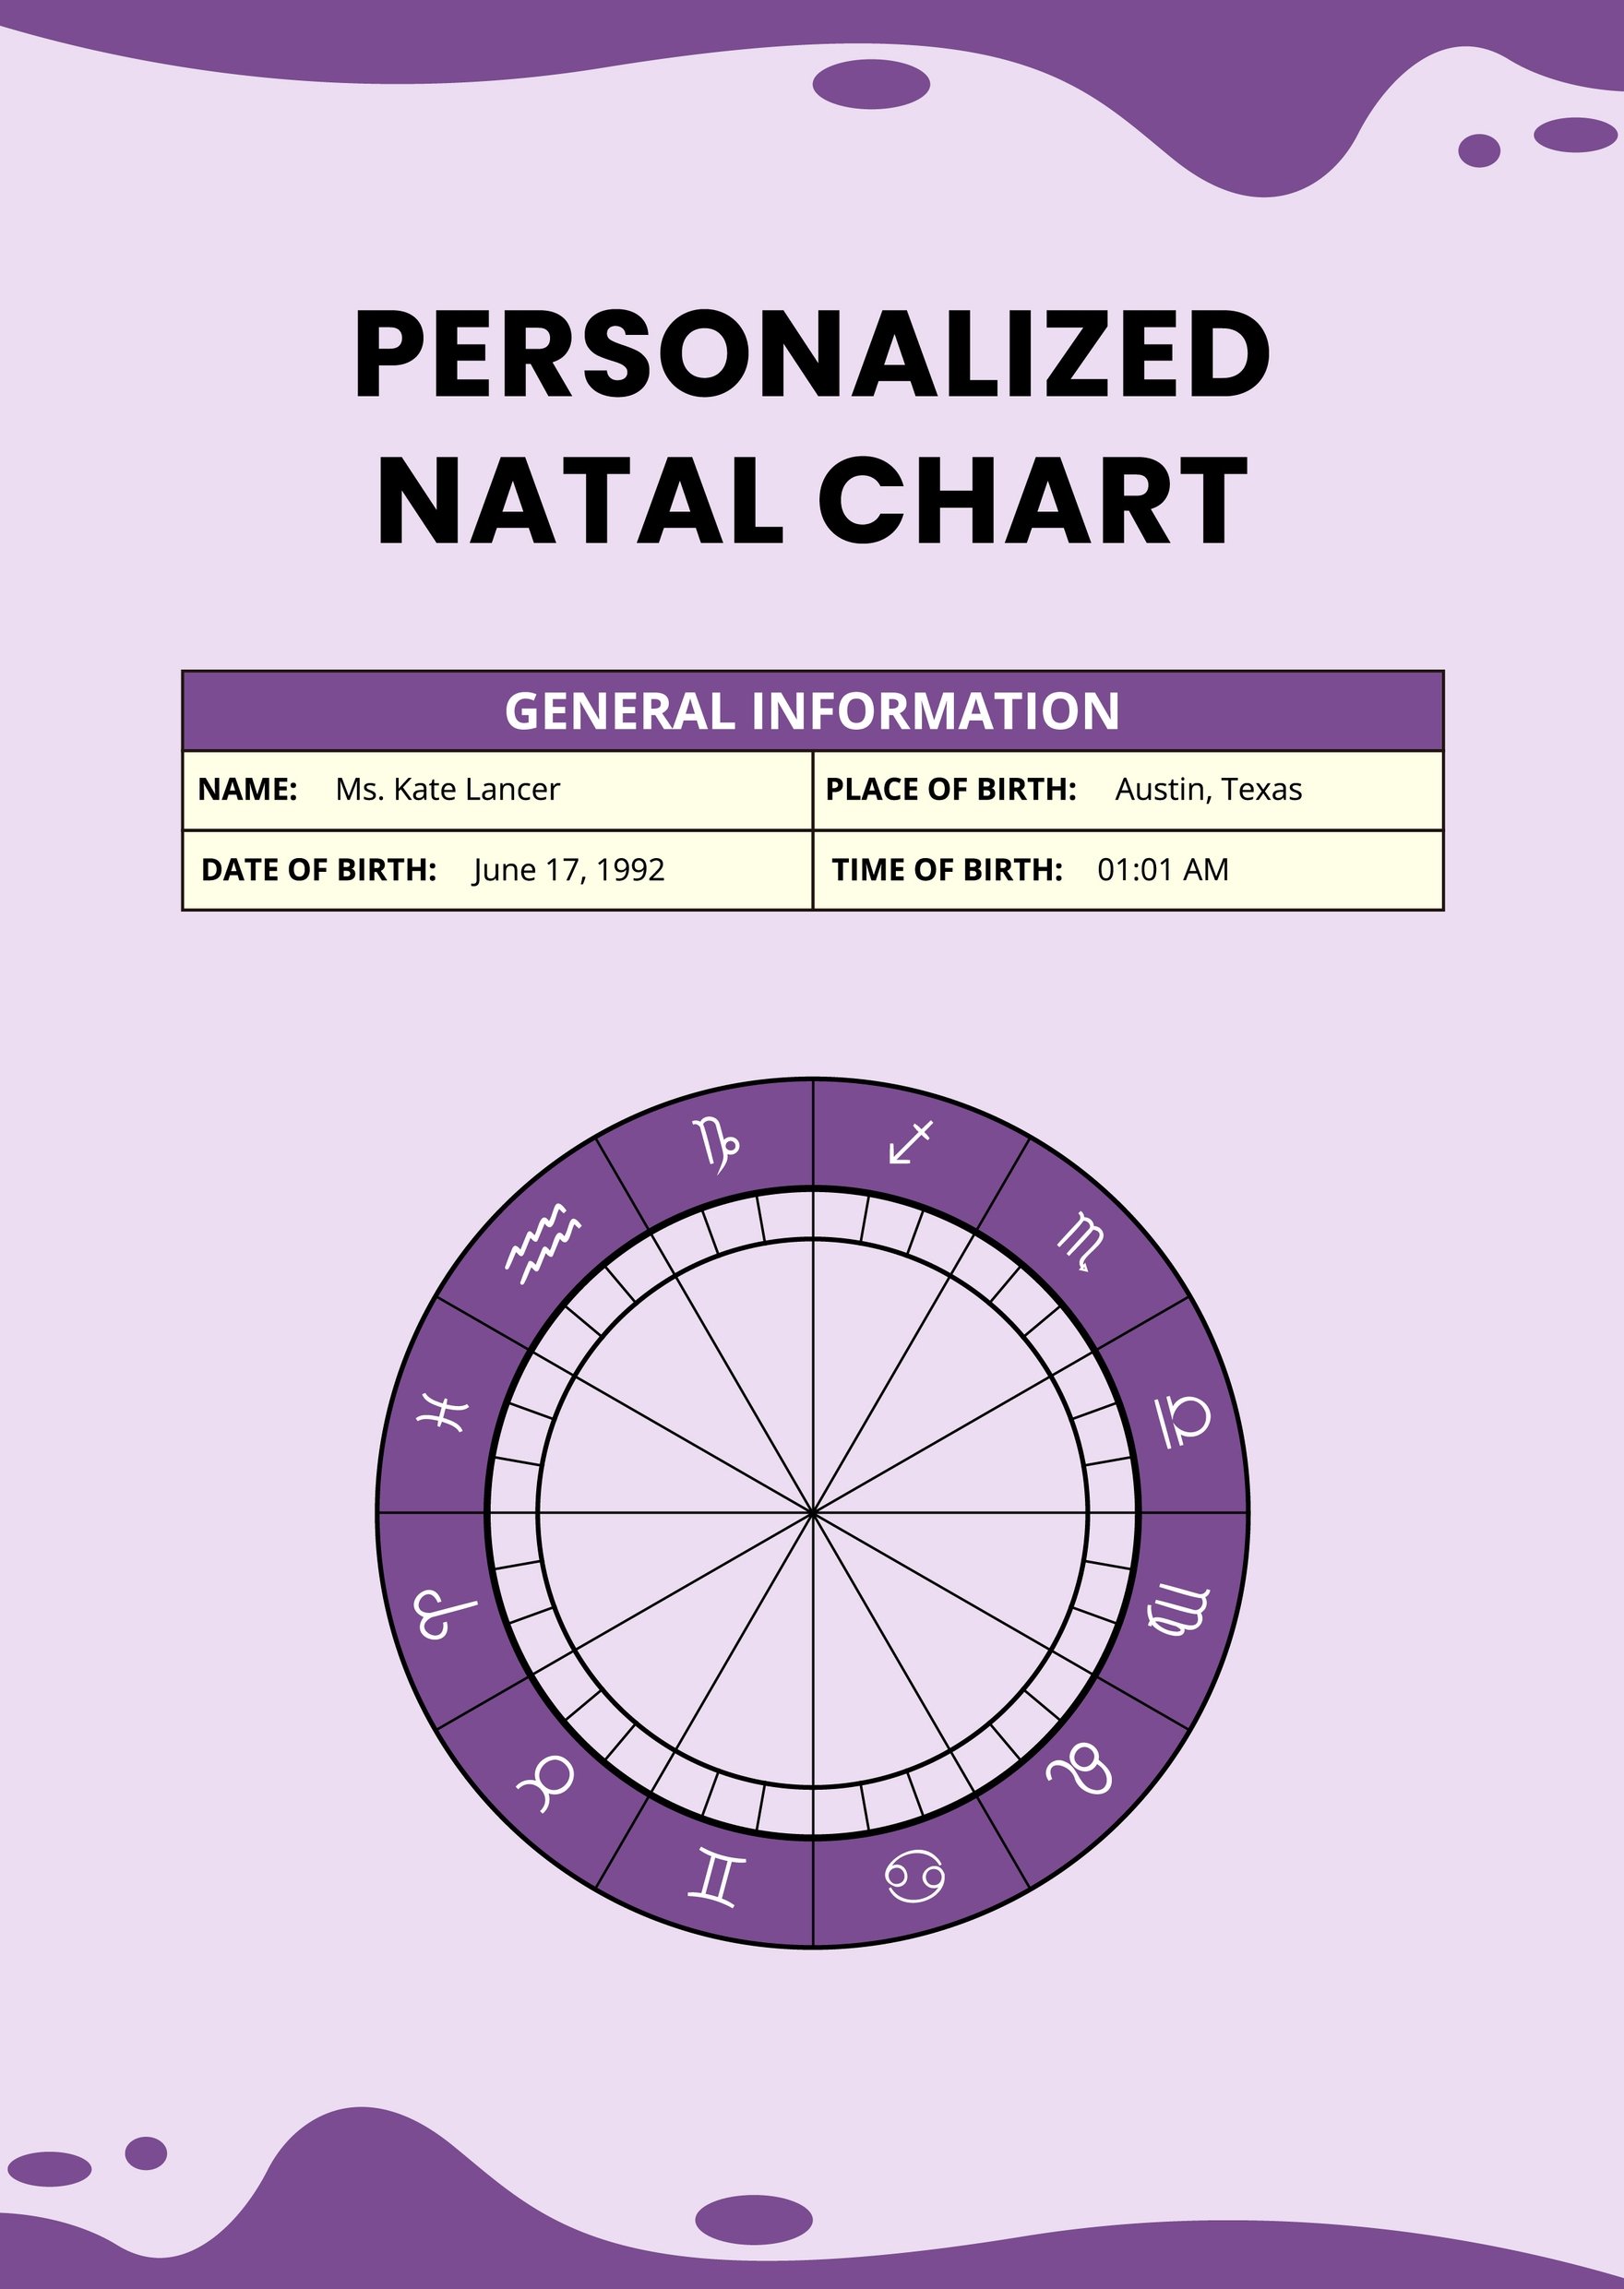 Personalized Natal Chart Template In Illustrator Pdf Download